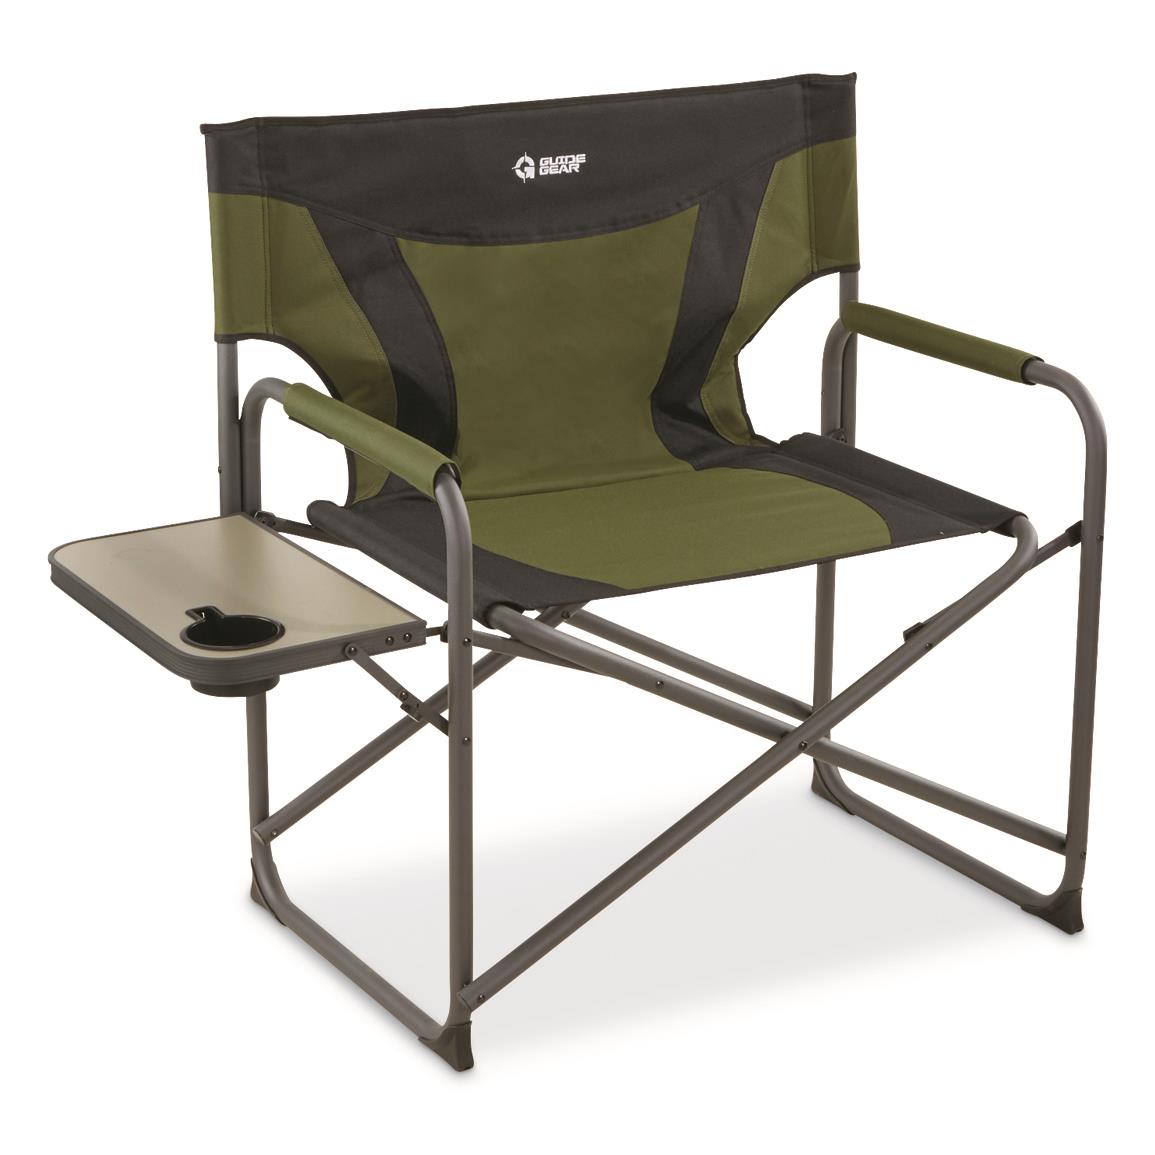 Folding Padded Director Chair XXL W/ Side Table 600 Lb Capacity Outdoor Camping 